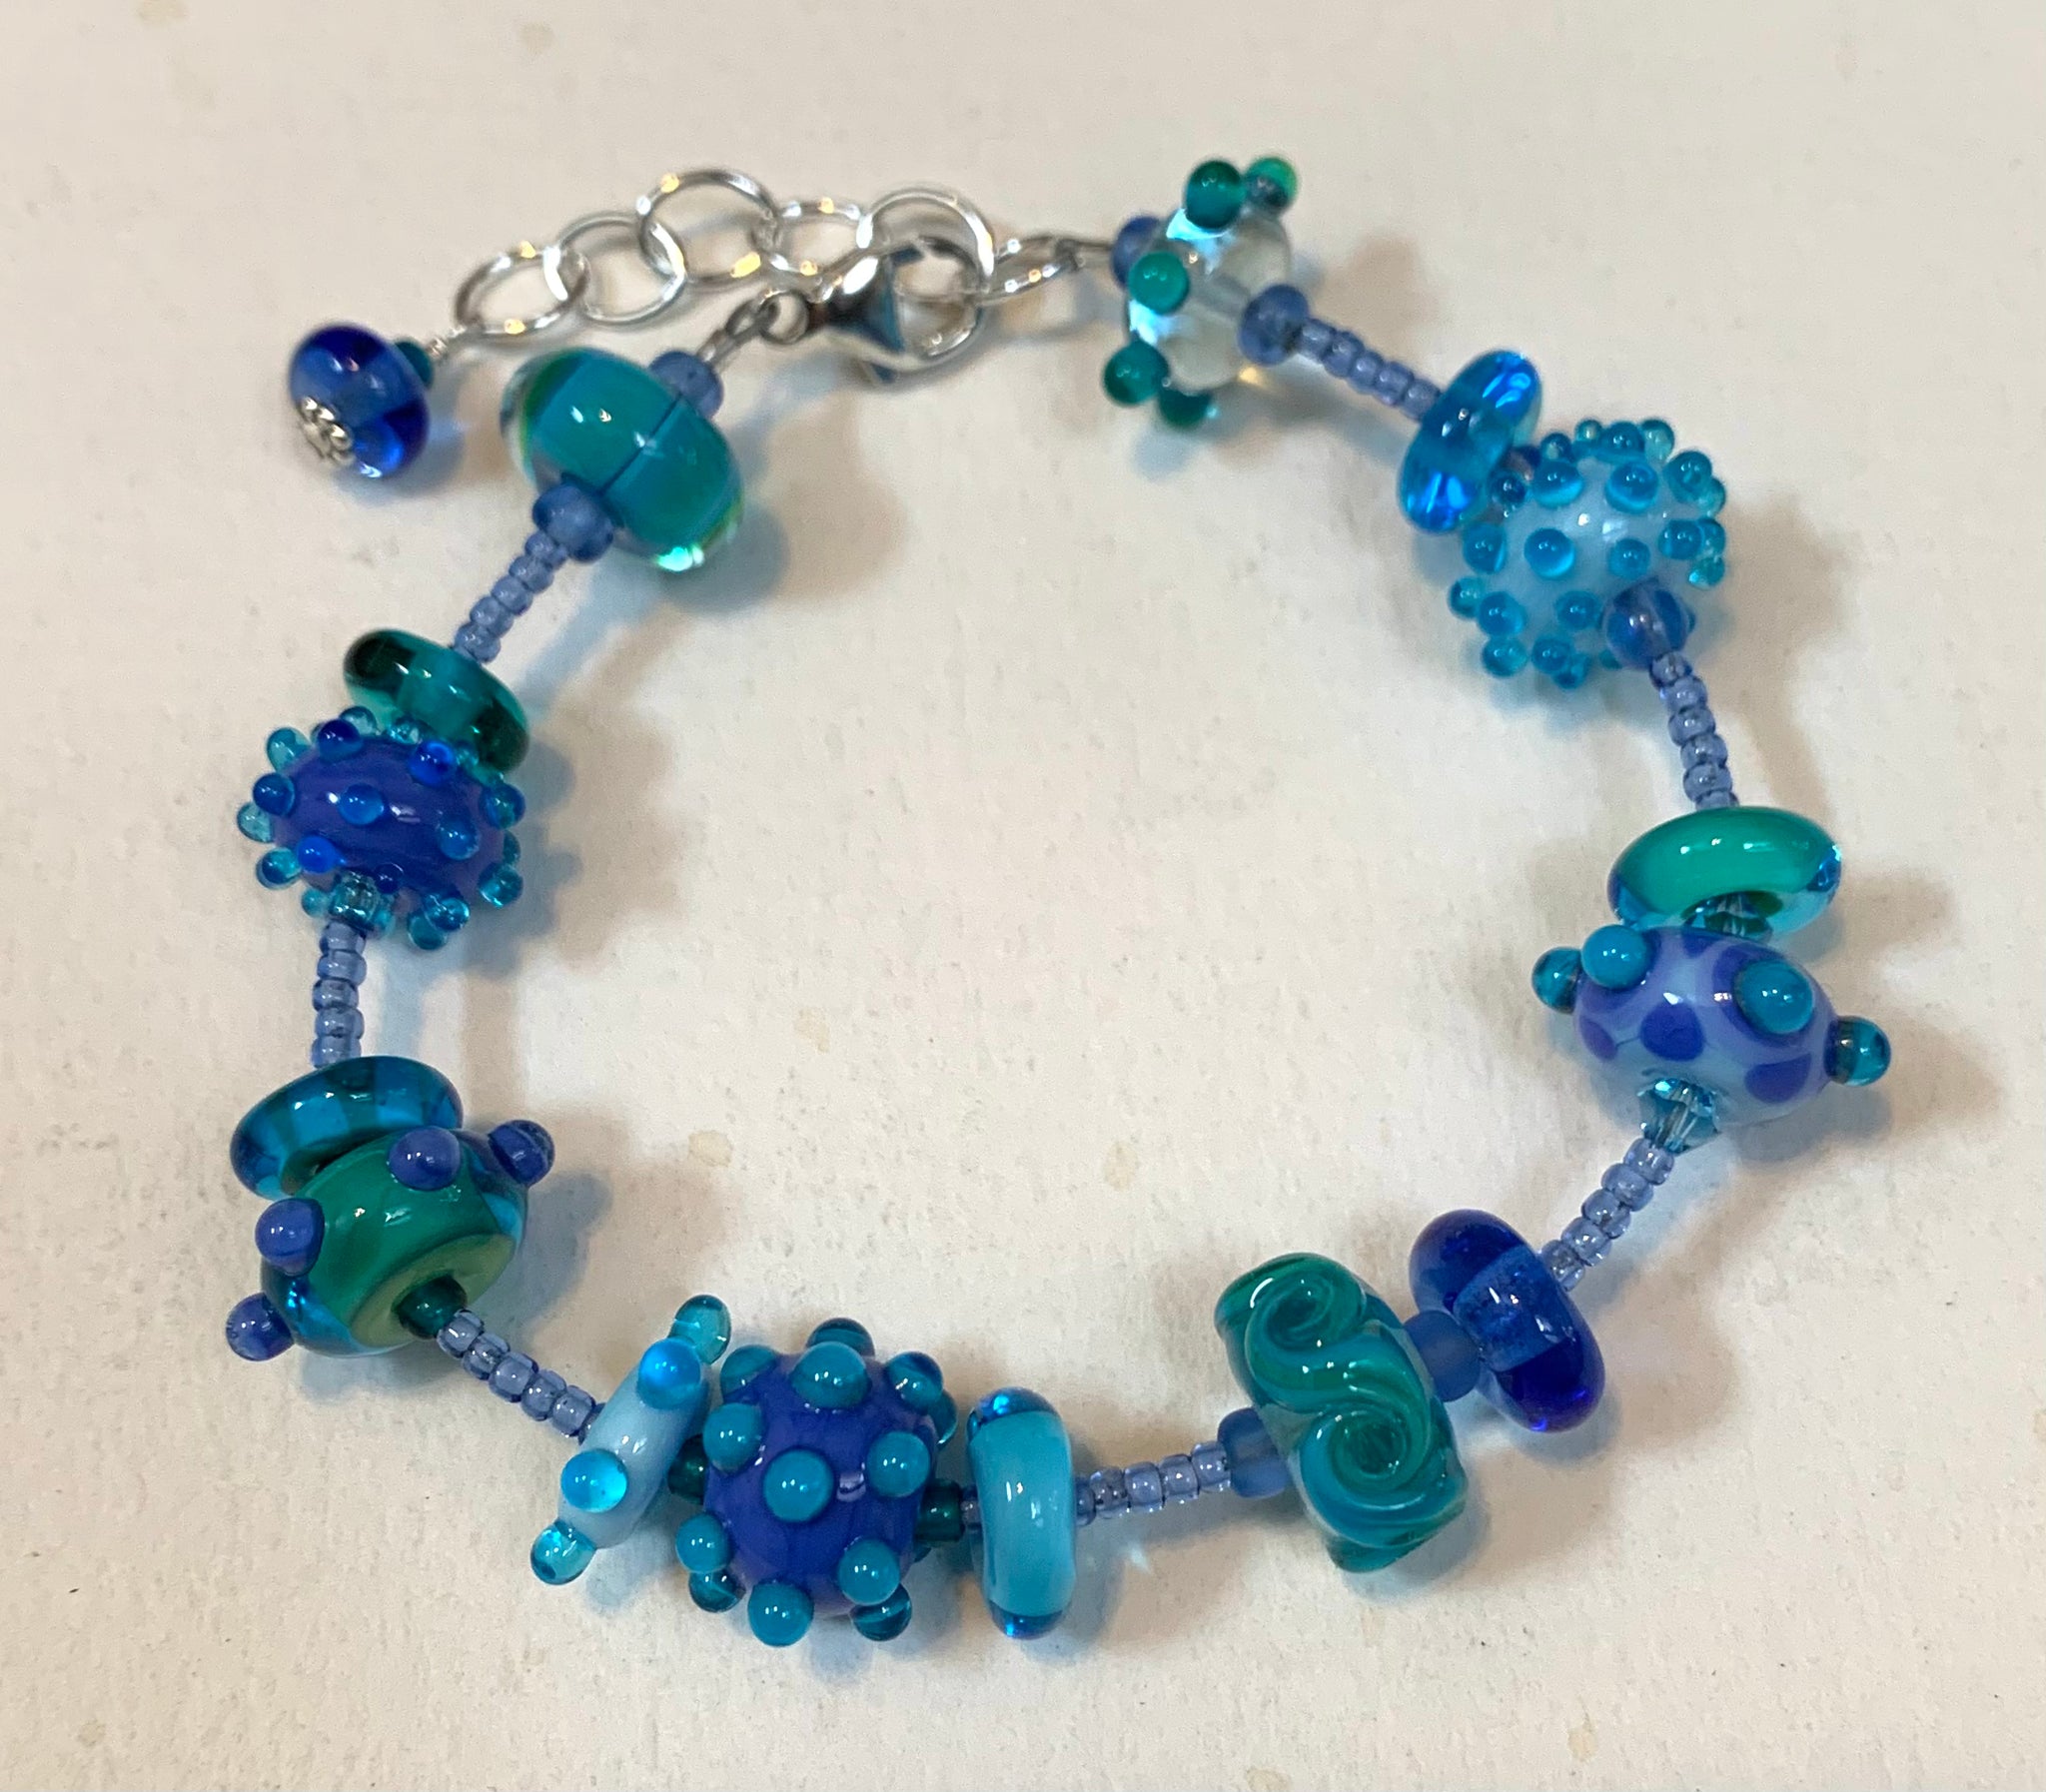 Periwinkle and turquoise bracelet